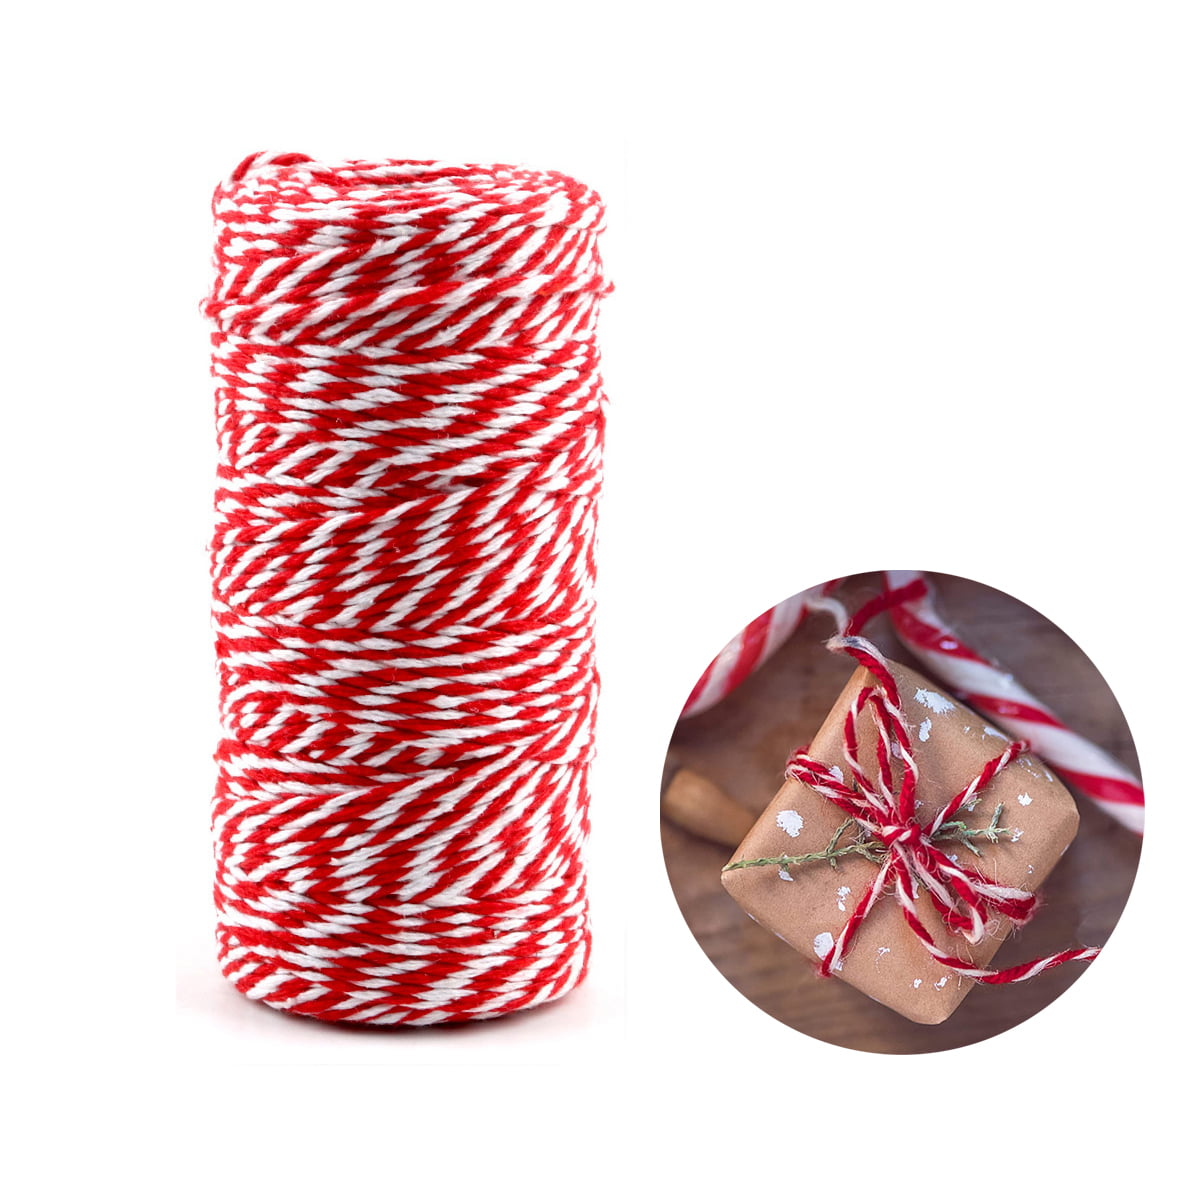 Red and White Twine,100M/328 Feet Cotton Bakers Twine,Christmas